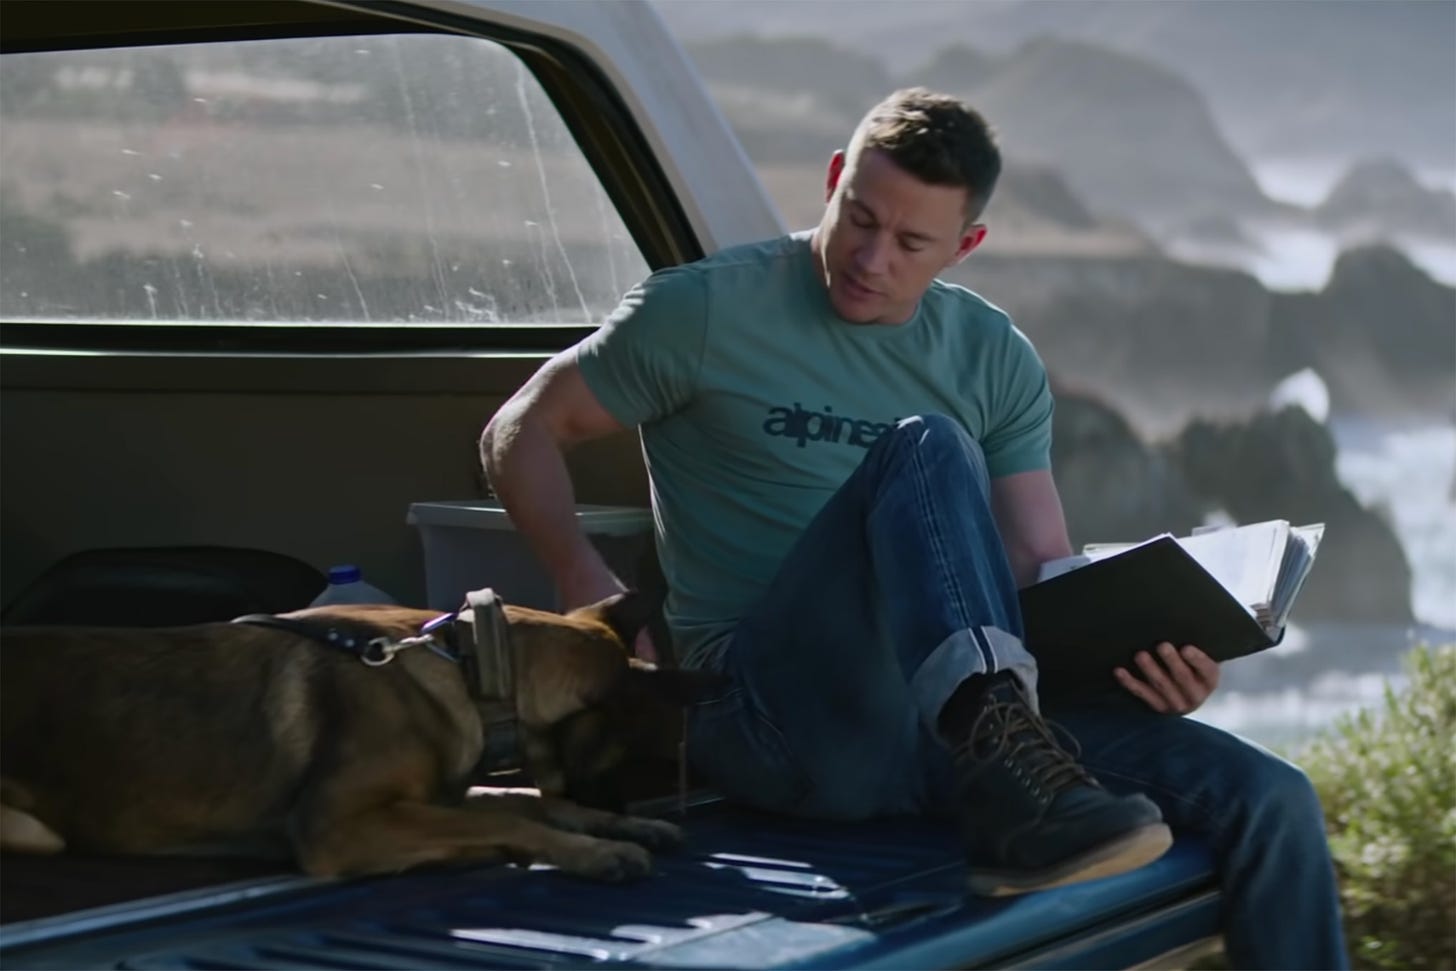 Channing Tatum's “Dog” is a light-hearted film to watch next